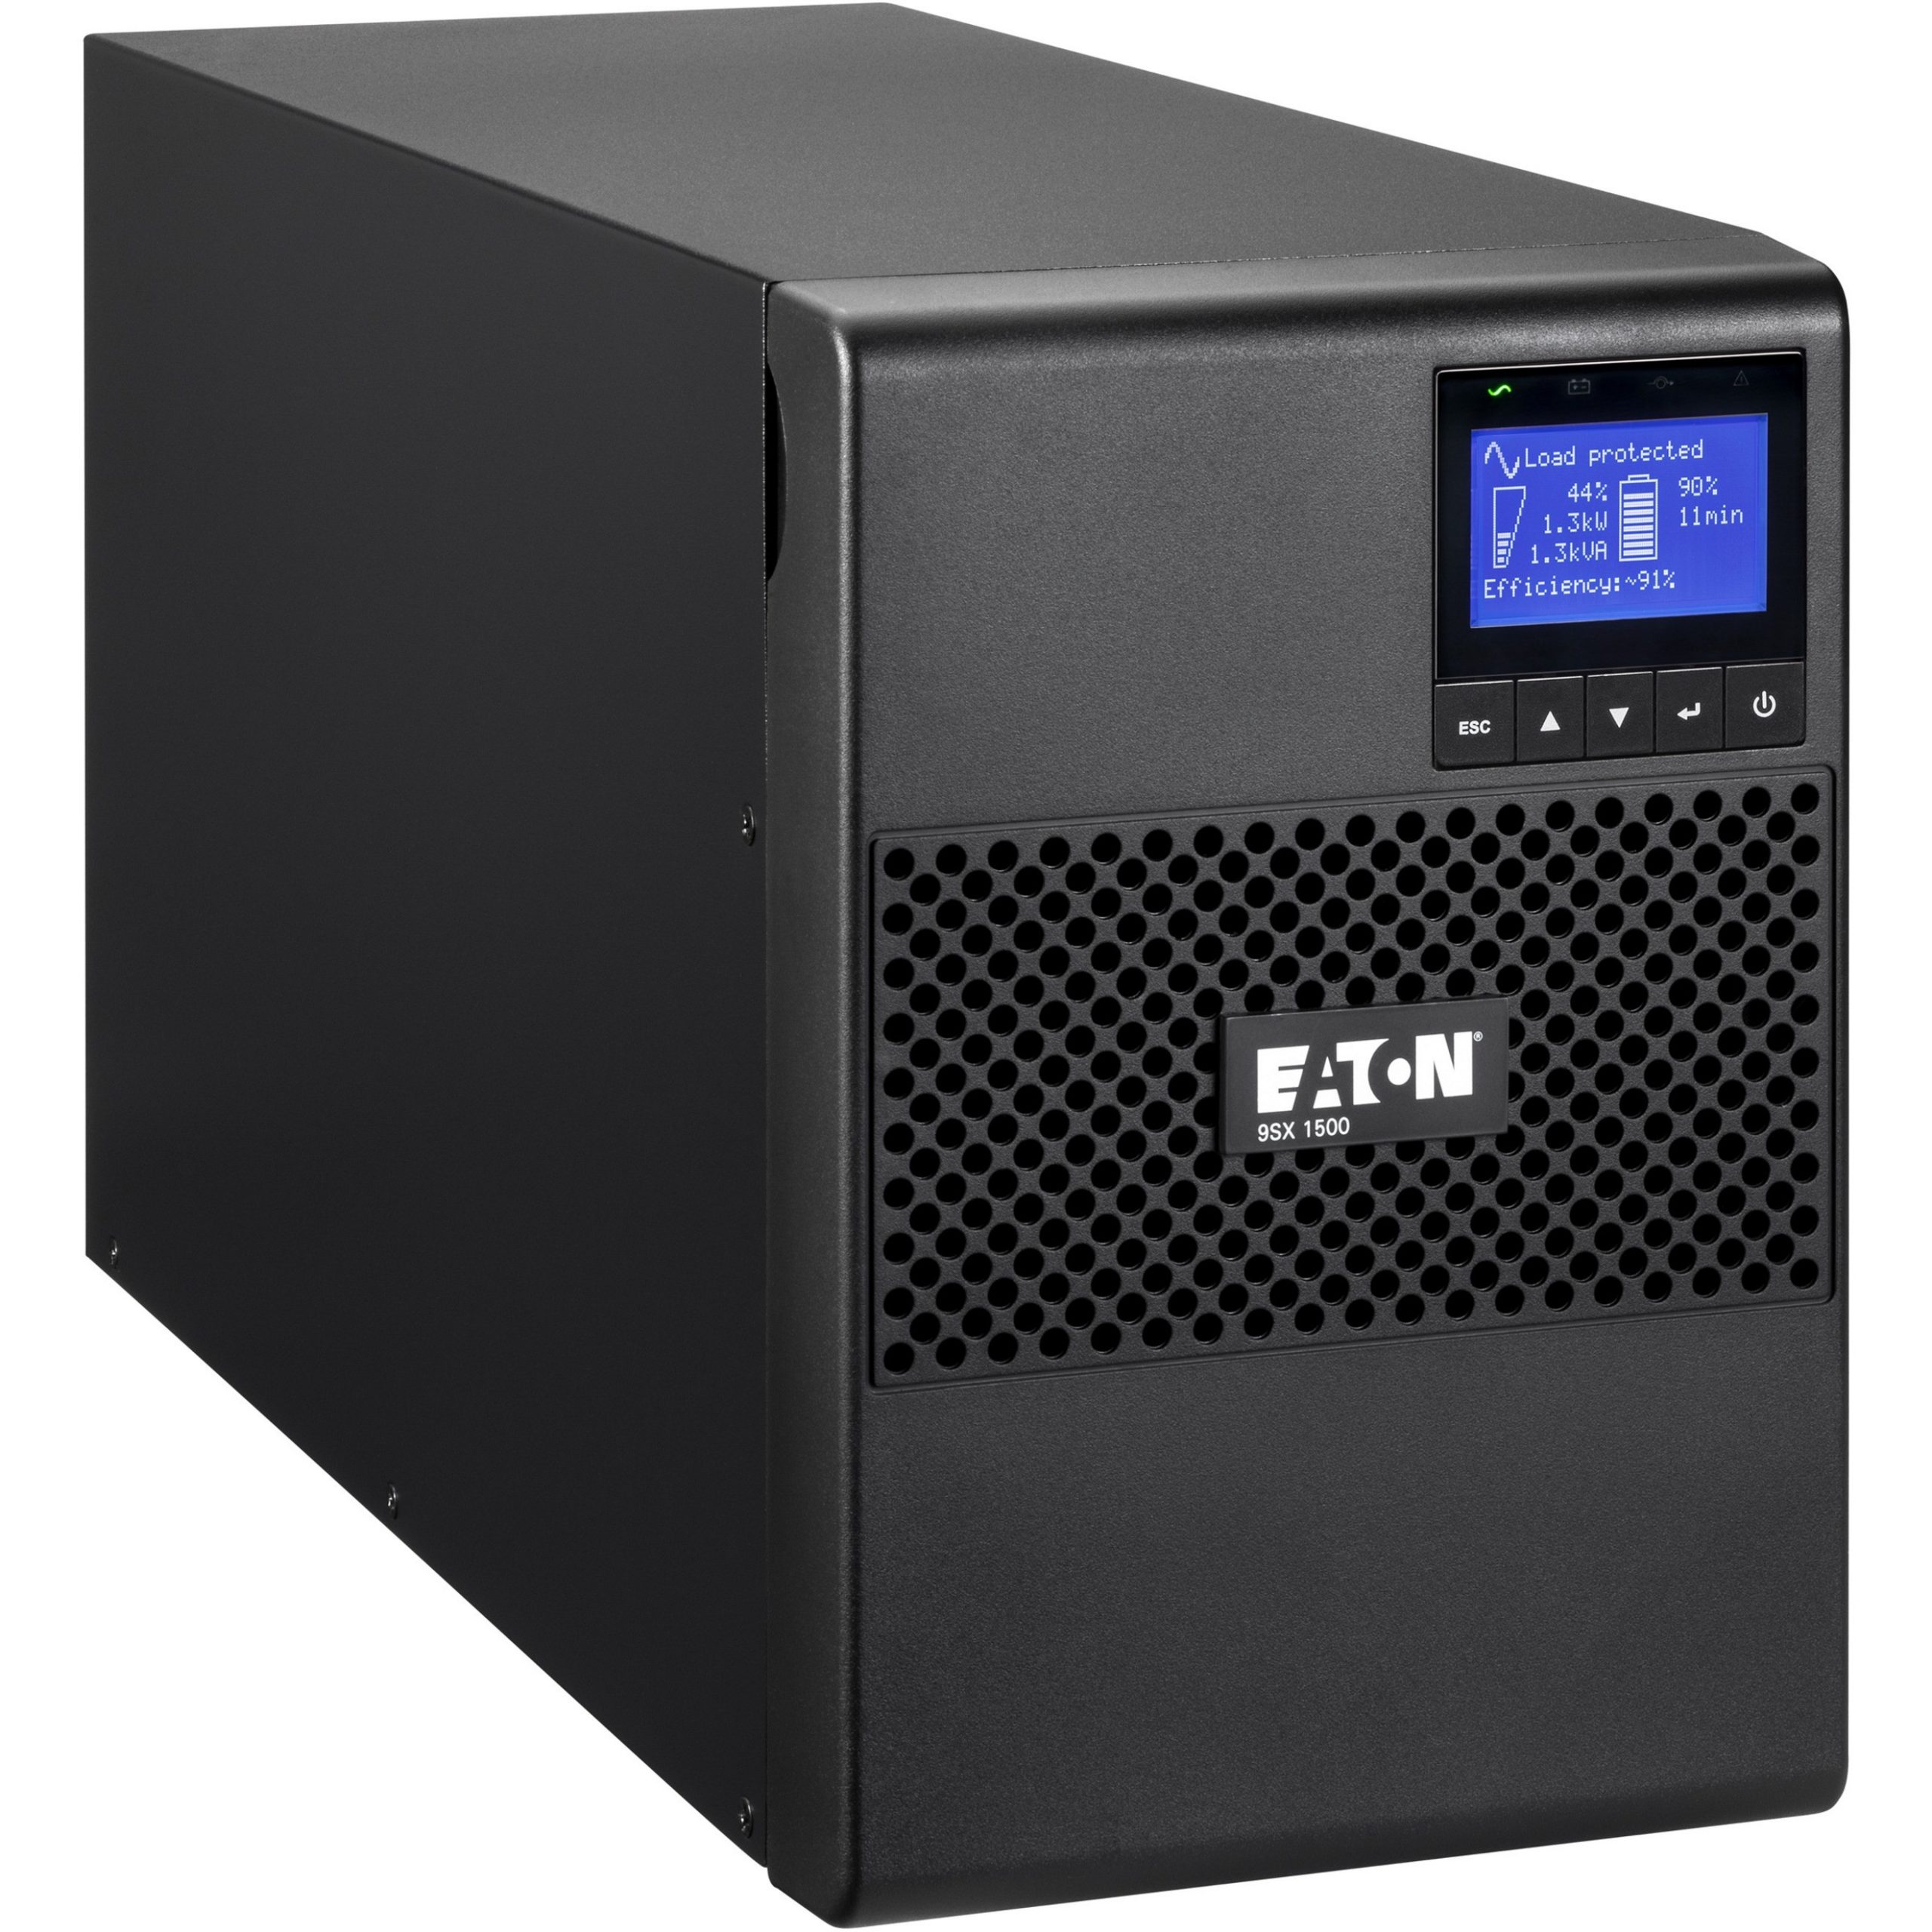 Eaton 9SX 1500VA 1350W 208V Online Double-Conversion UPS6 C13 Outlets- Cybersecure Network Card Option- Extended Run- TowerTower5.30 M… 9SX1500G